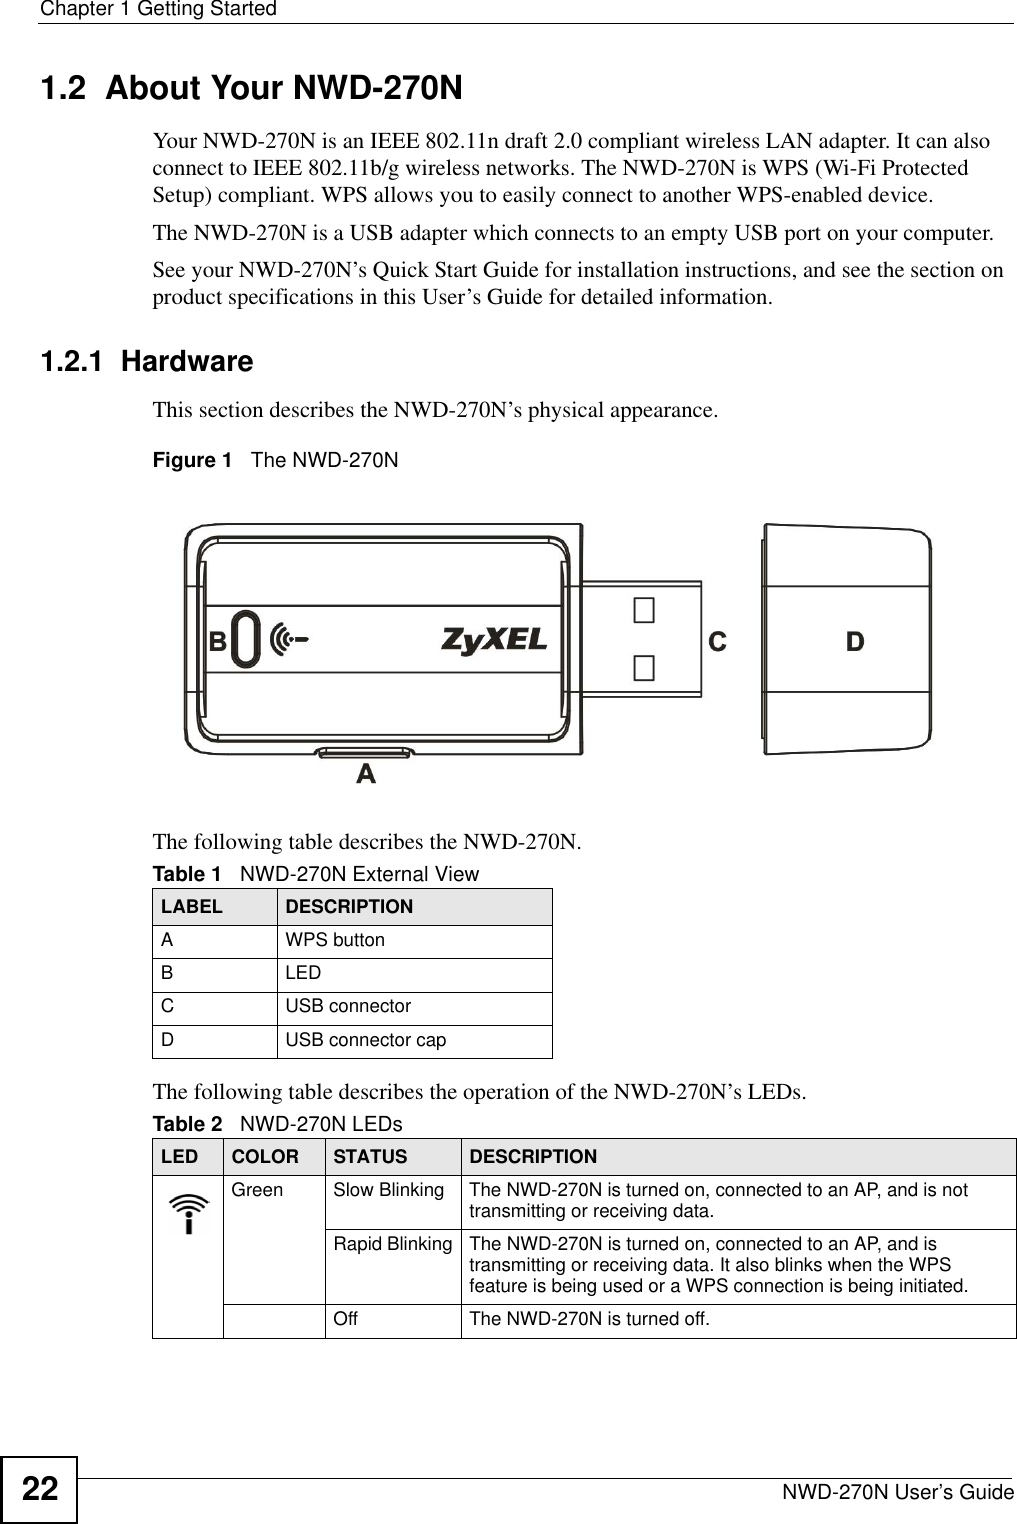 Chapter 1 Getting StartedNWD-270N User’s Guide221.2  About Your NWD-270N    Your NWD-270N is an IEEE 802.11n draft 2.0 compliant wireless LAN adapter. It can also connect to IEEE 802.11b/g wireless networks. The NWD-270N is WPS (Wi-Fi Protected Setup) compliant. WPS allows you to easily connect to another WPS-enabled device. The NWD-270N is a USB adapter which connects to an empty USB port on your computer.See your NWD-270N’s Quick Start Guide for installation instructions, and see the section on product specifications in this User’s Guide for detailed information.1.2.1  HardwareThis section describes the NWD-270N’s physical appearance.Figure 1   The NWD-270NThe following table describes the NWD-270N.The following table describes the operation of the NWD-270N’s LEDs.Table 1   NWD-270N External ViewLABEL DESCRIPTIONA WPS buttonBLEDC USB connectorD USB connector capTable 2   NWD-270N LEDsLED COLOR STATUS DESCRIPTIONGreen Slow Blinking The NWD-270N is turned on, connected to an AP, and is not transmitting or receiving data.Rapid Blinking The NWD-270N is turned on, connected to an AP, and is transmitting or receiving data. It also blinks when the WPS feature is being used or a WPS connection is being initiated.Off The NWD-270N is turned off.